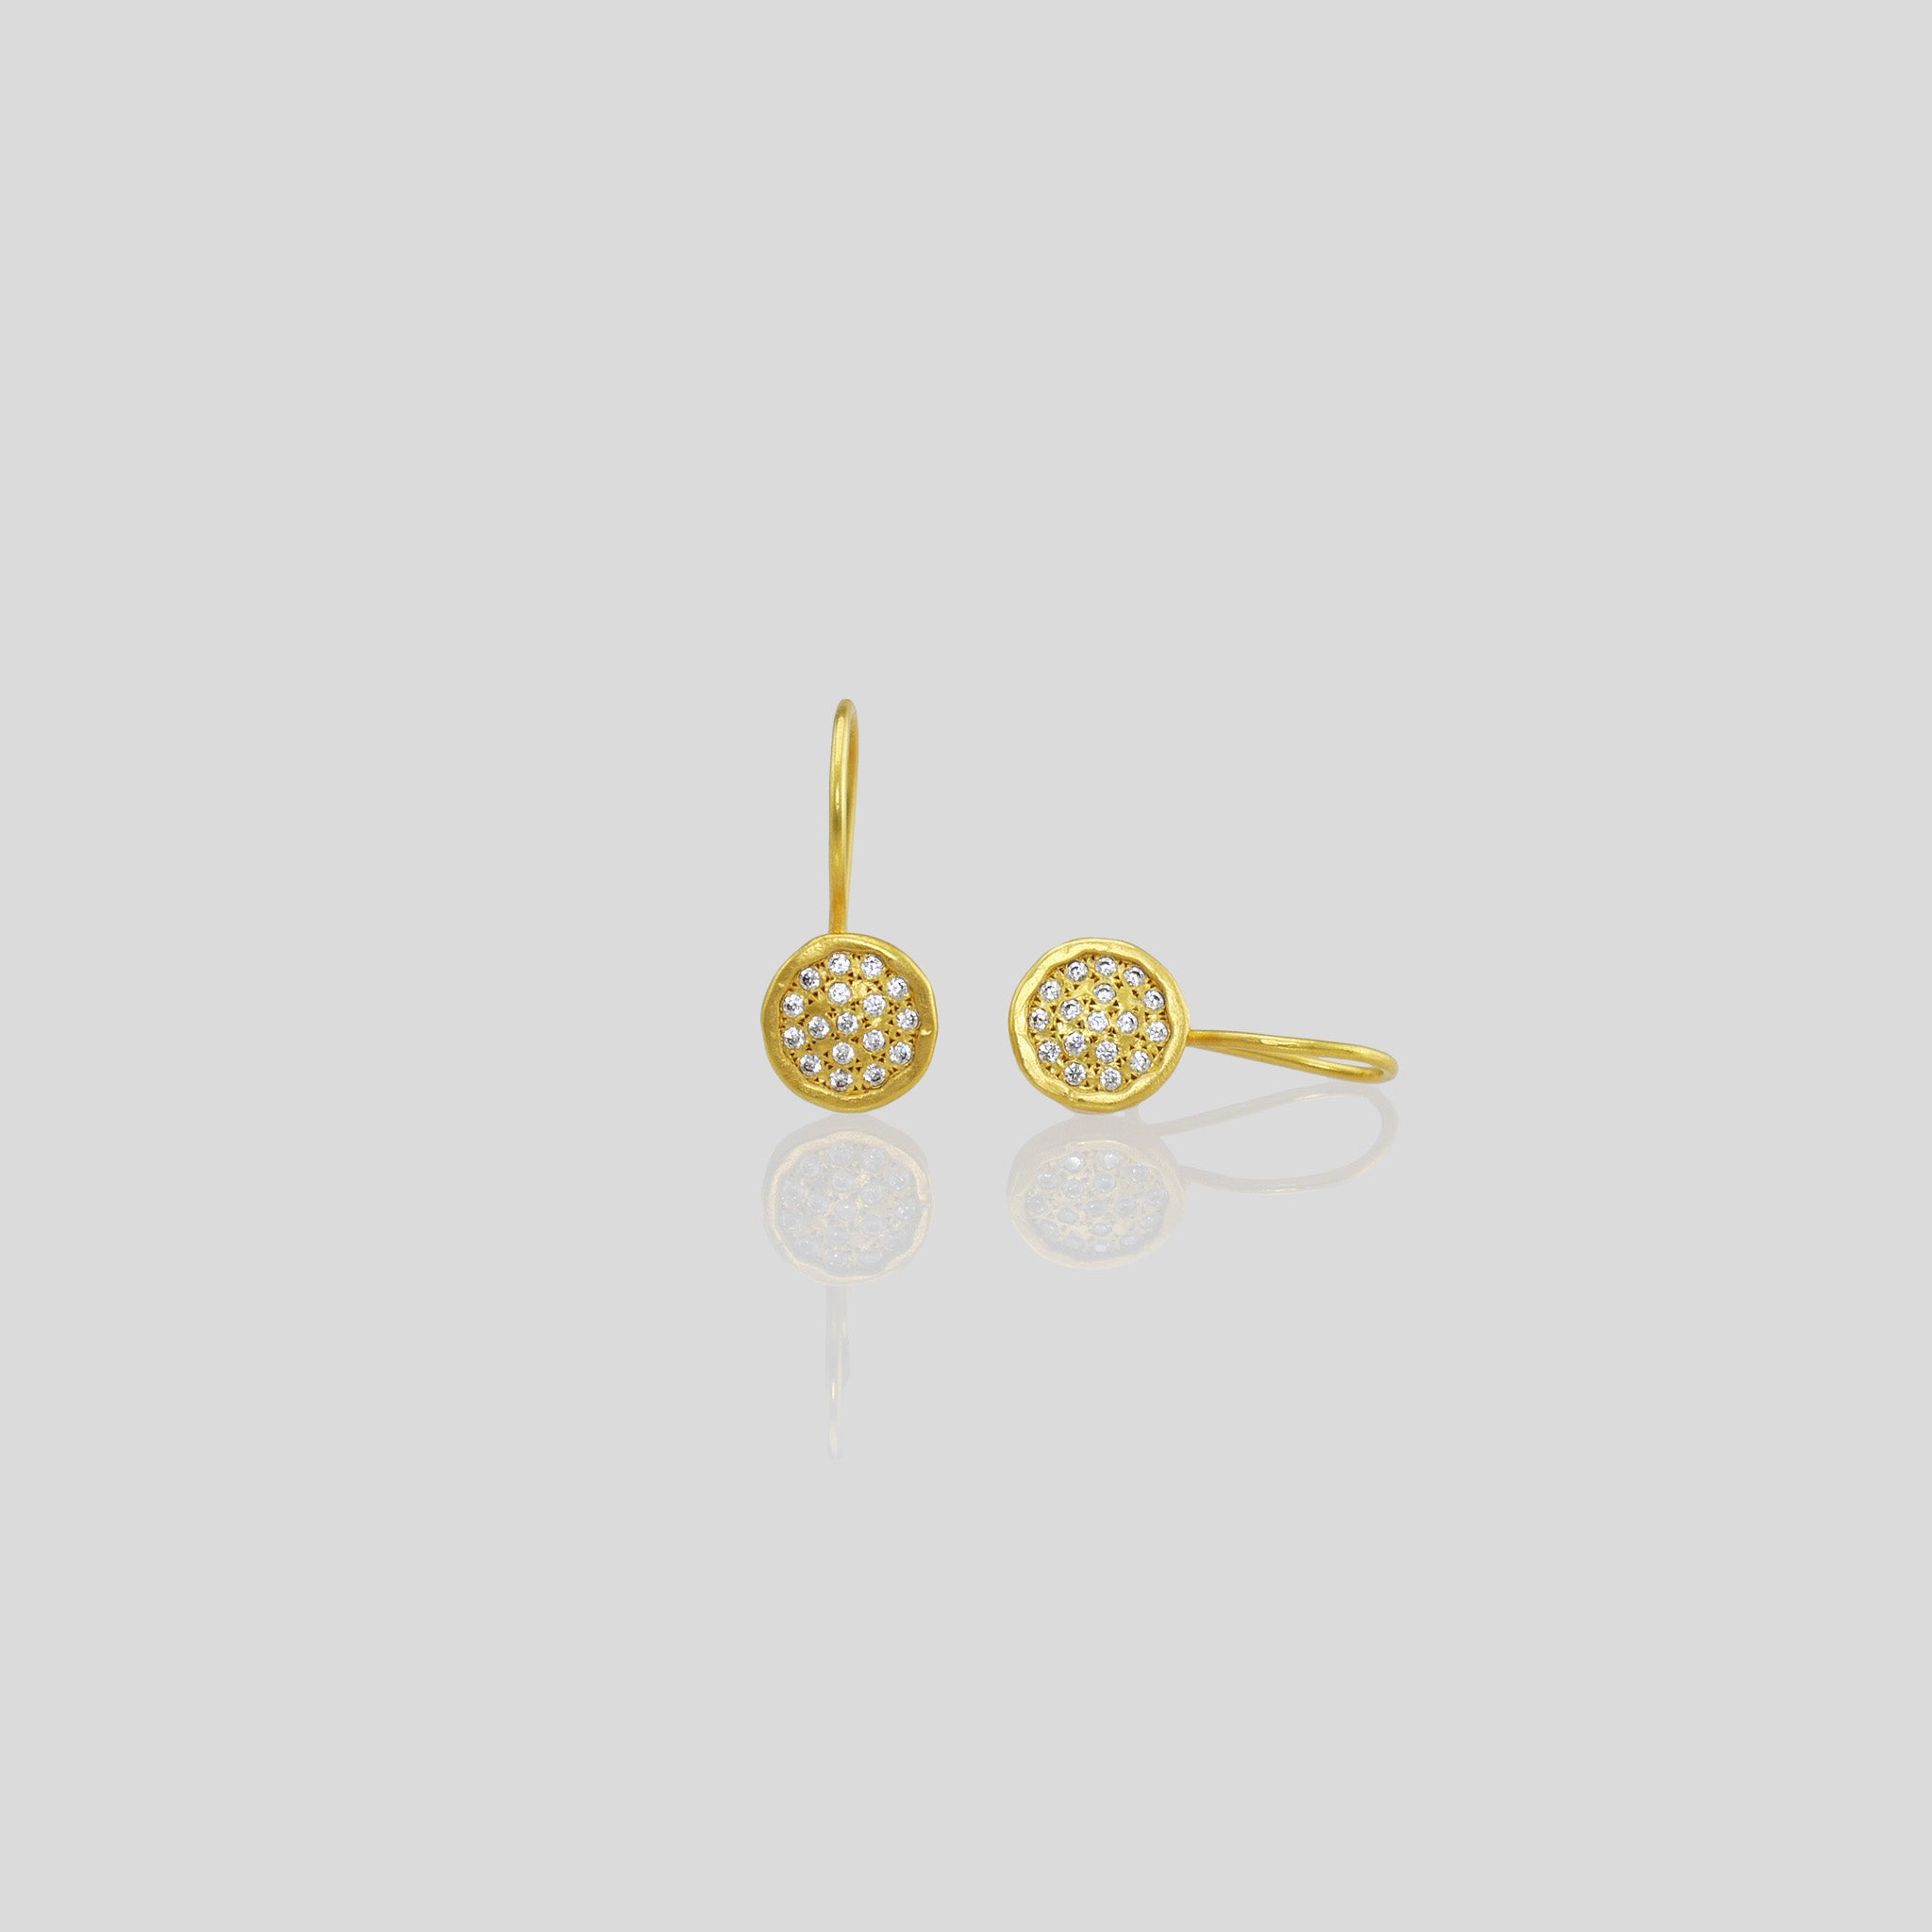 Gold drop earrings adorned with sparkling Diamonds, reminiscent of a starry night sky.